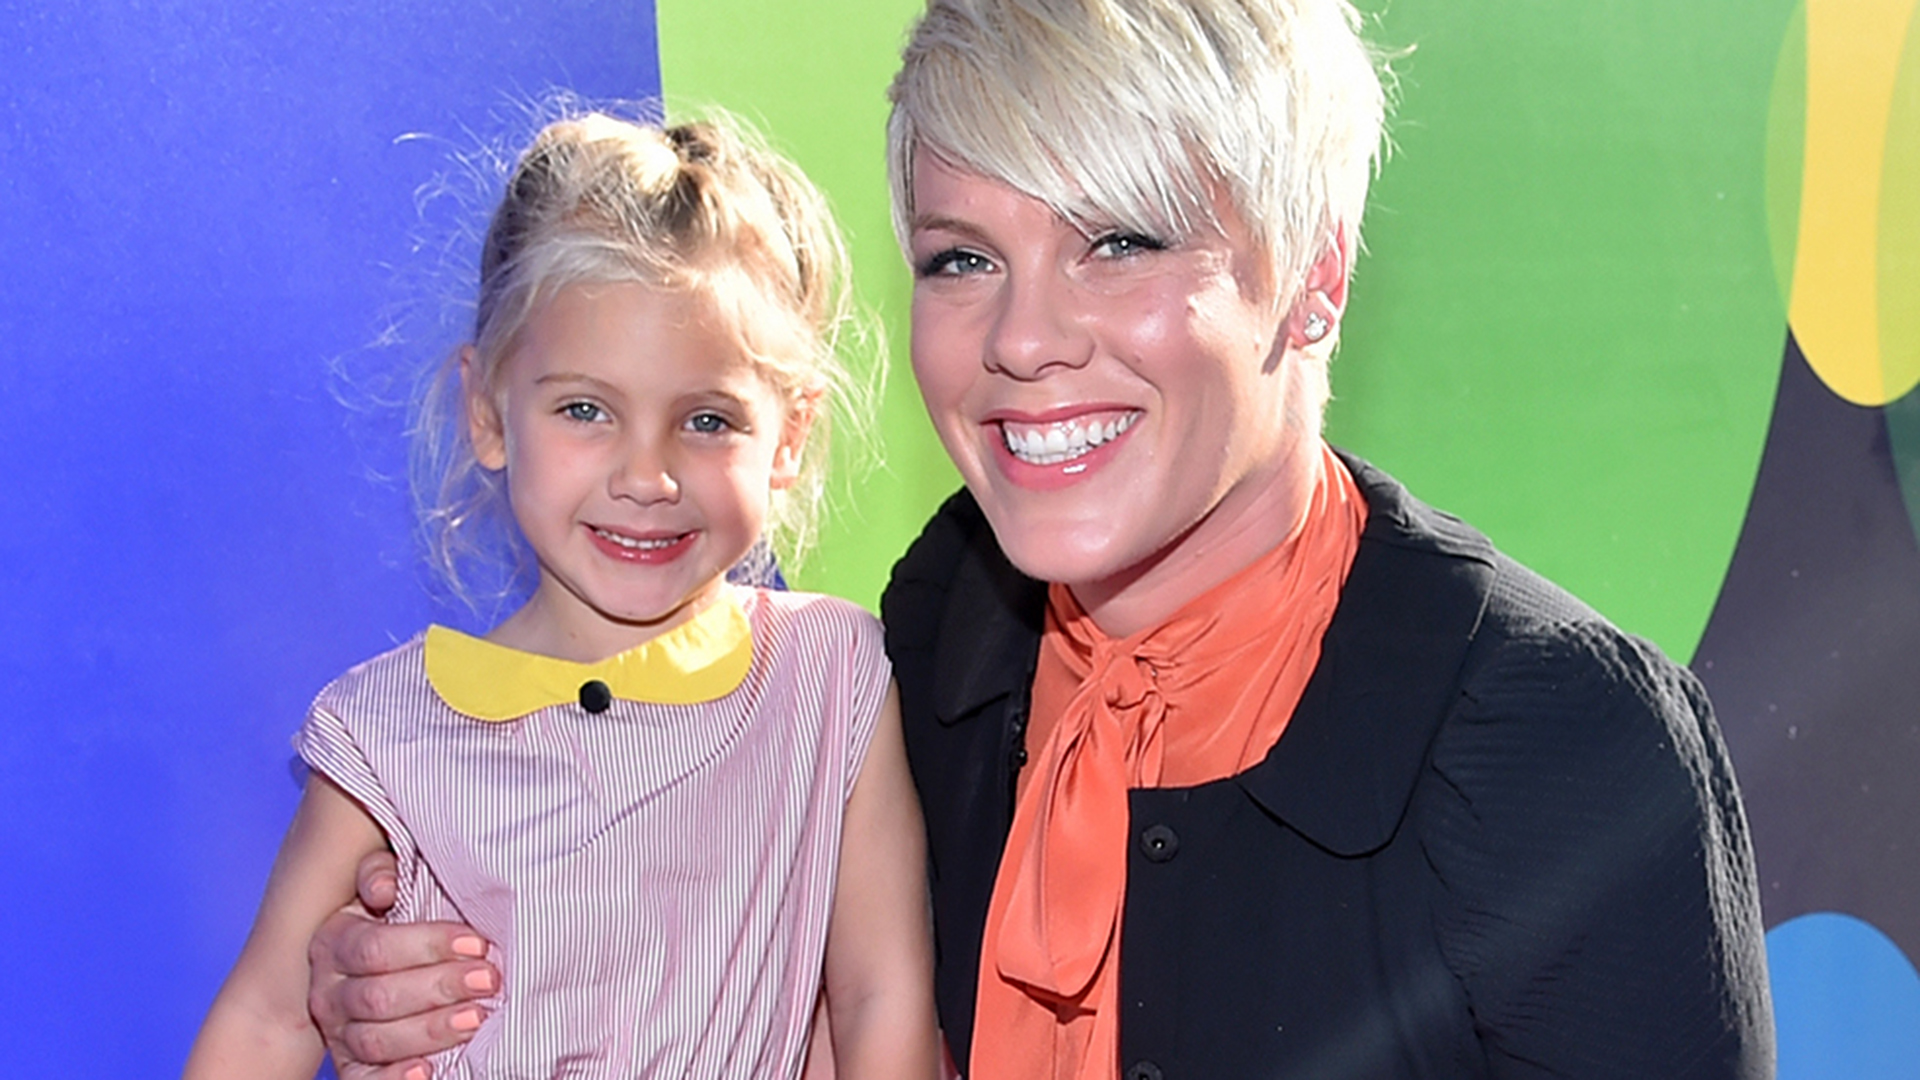 HOLLYWOOD, CA - JUNE 08: Recording artist Pink (R) and daughter attend the Los Angeles Premiere and Party for DisneyÂ•PixarÂ’s INSIDE OUT at El Capitan Theatre on June 8, 2015 in Hollywood, California.  (Photo by Alberto E. Rodriguez/Getty Images for Disney)